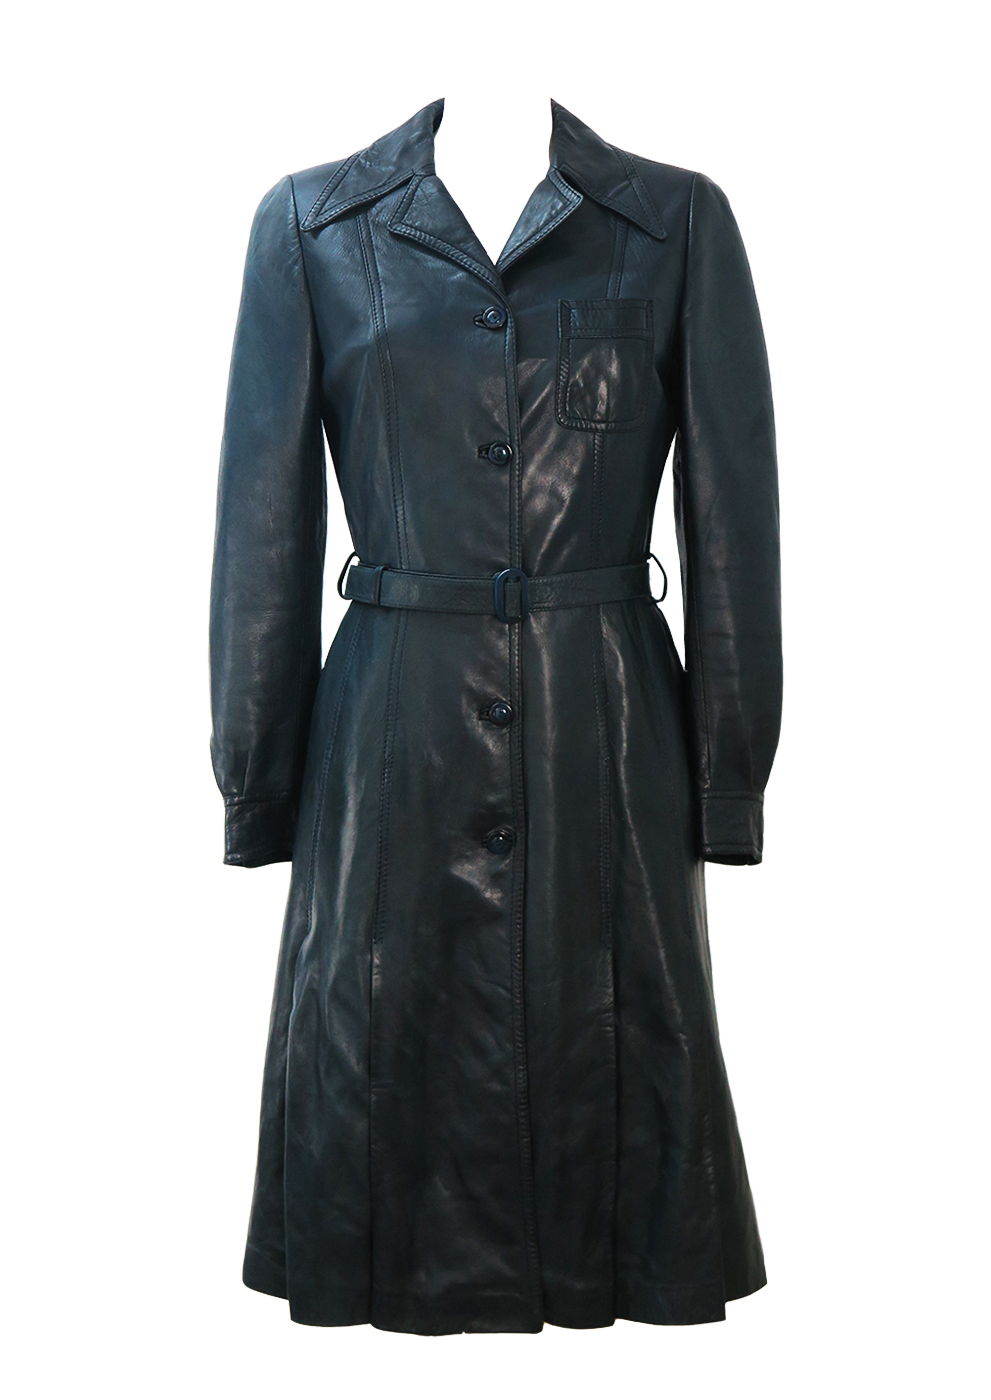 Vintage 70's Navy Blue Belted Leather Coat with Pleat Detail - S ...